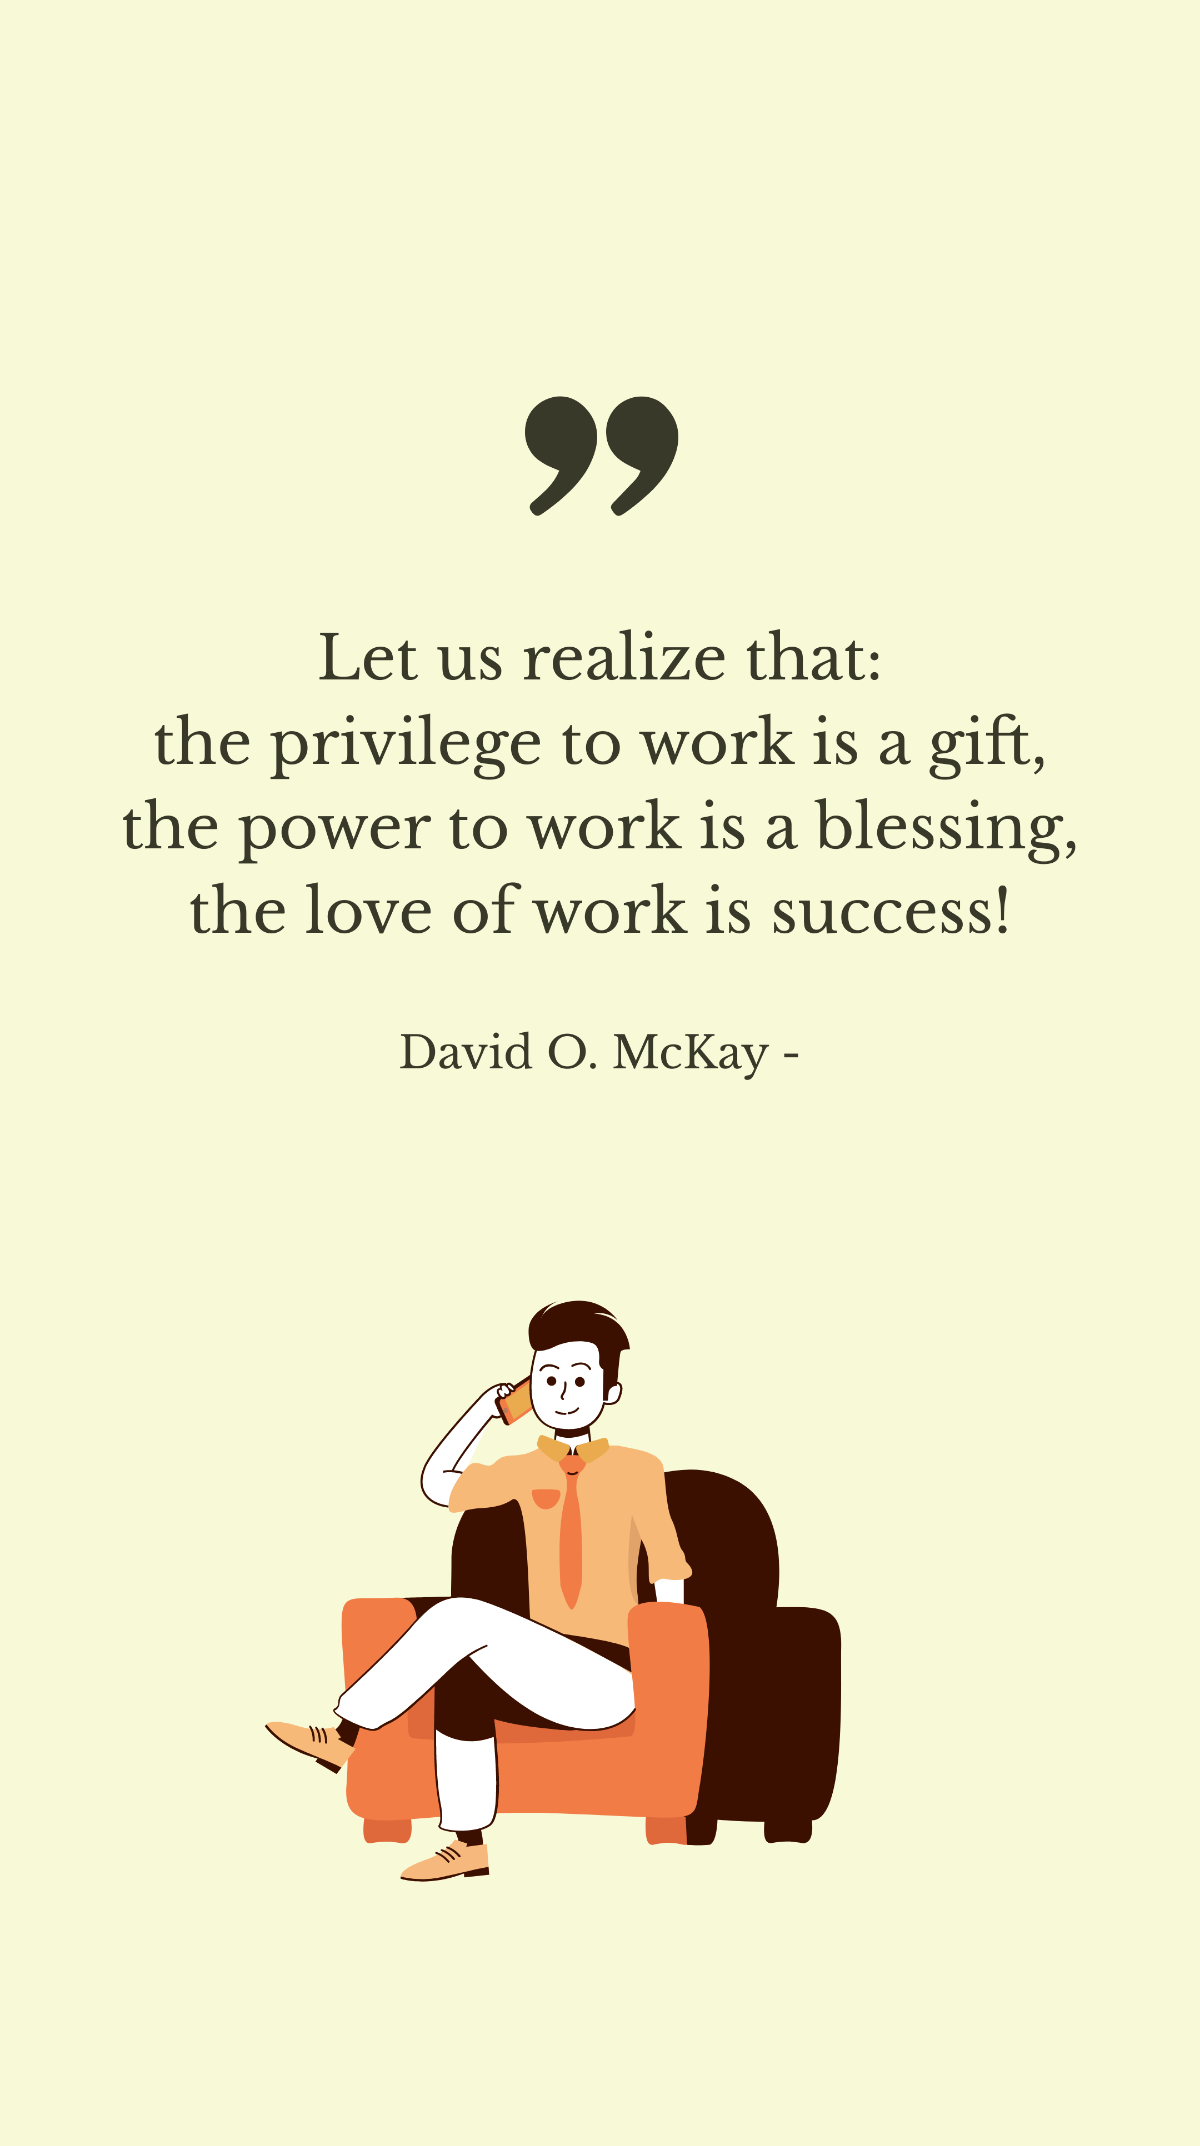 David O. McKay - Let us realize that: the privilege to work is a gift, the power to work is a blessing, the love of work is success! Template